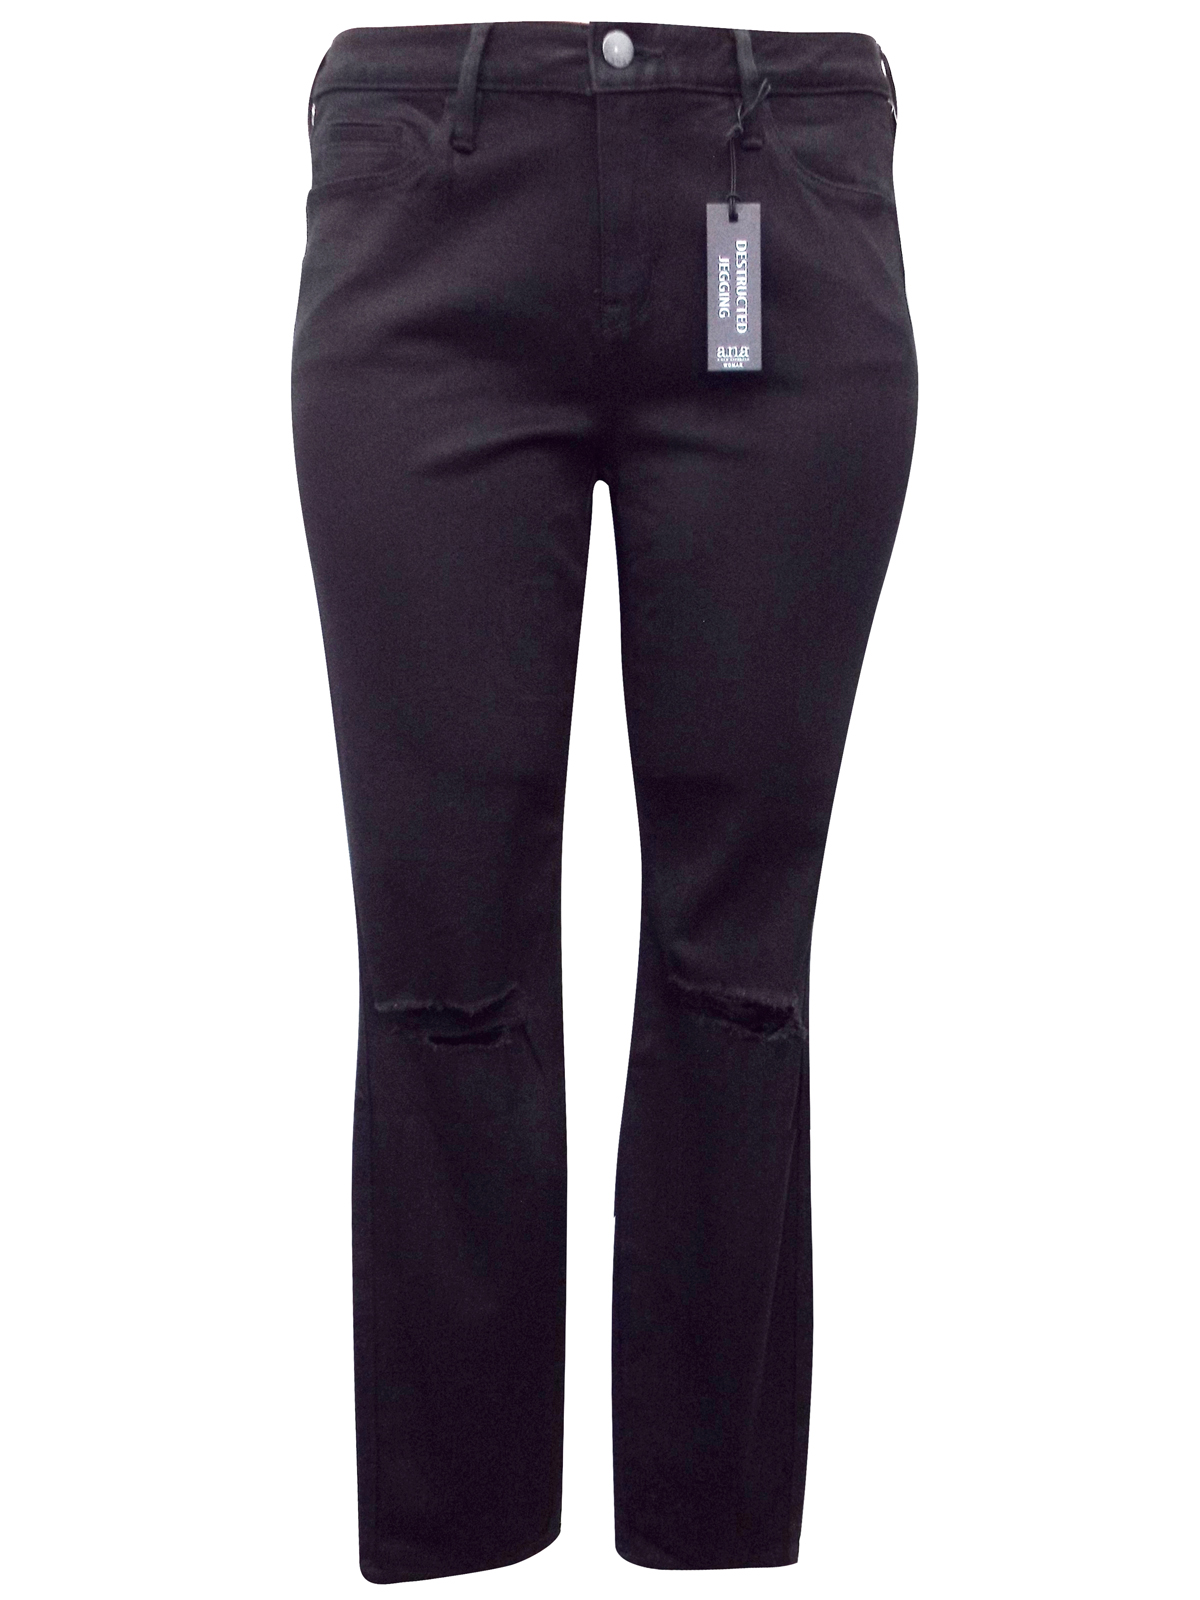 A.N.A - - A.N.A BLACK Slim Fit Destructed Jeggings - Plus Size 14 to 28